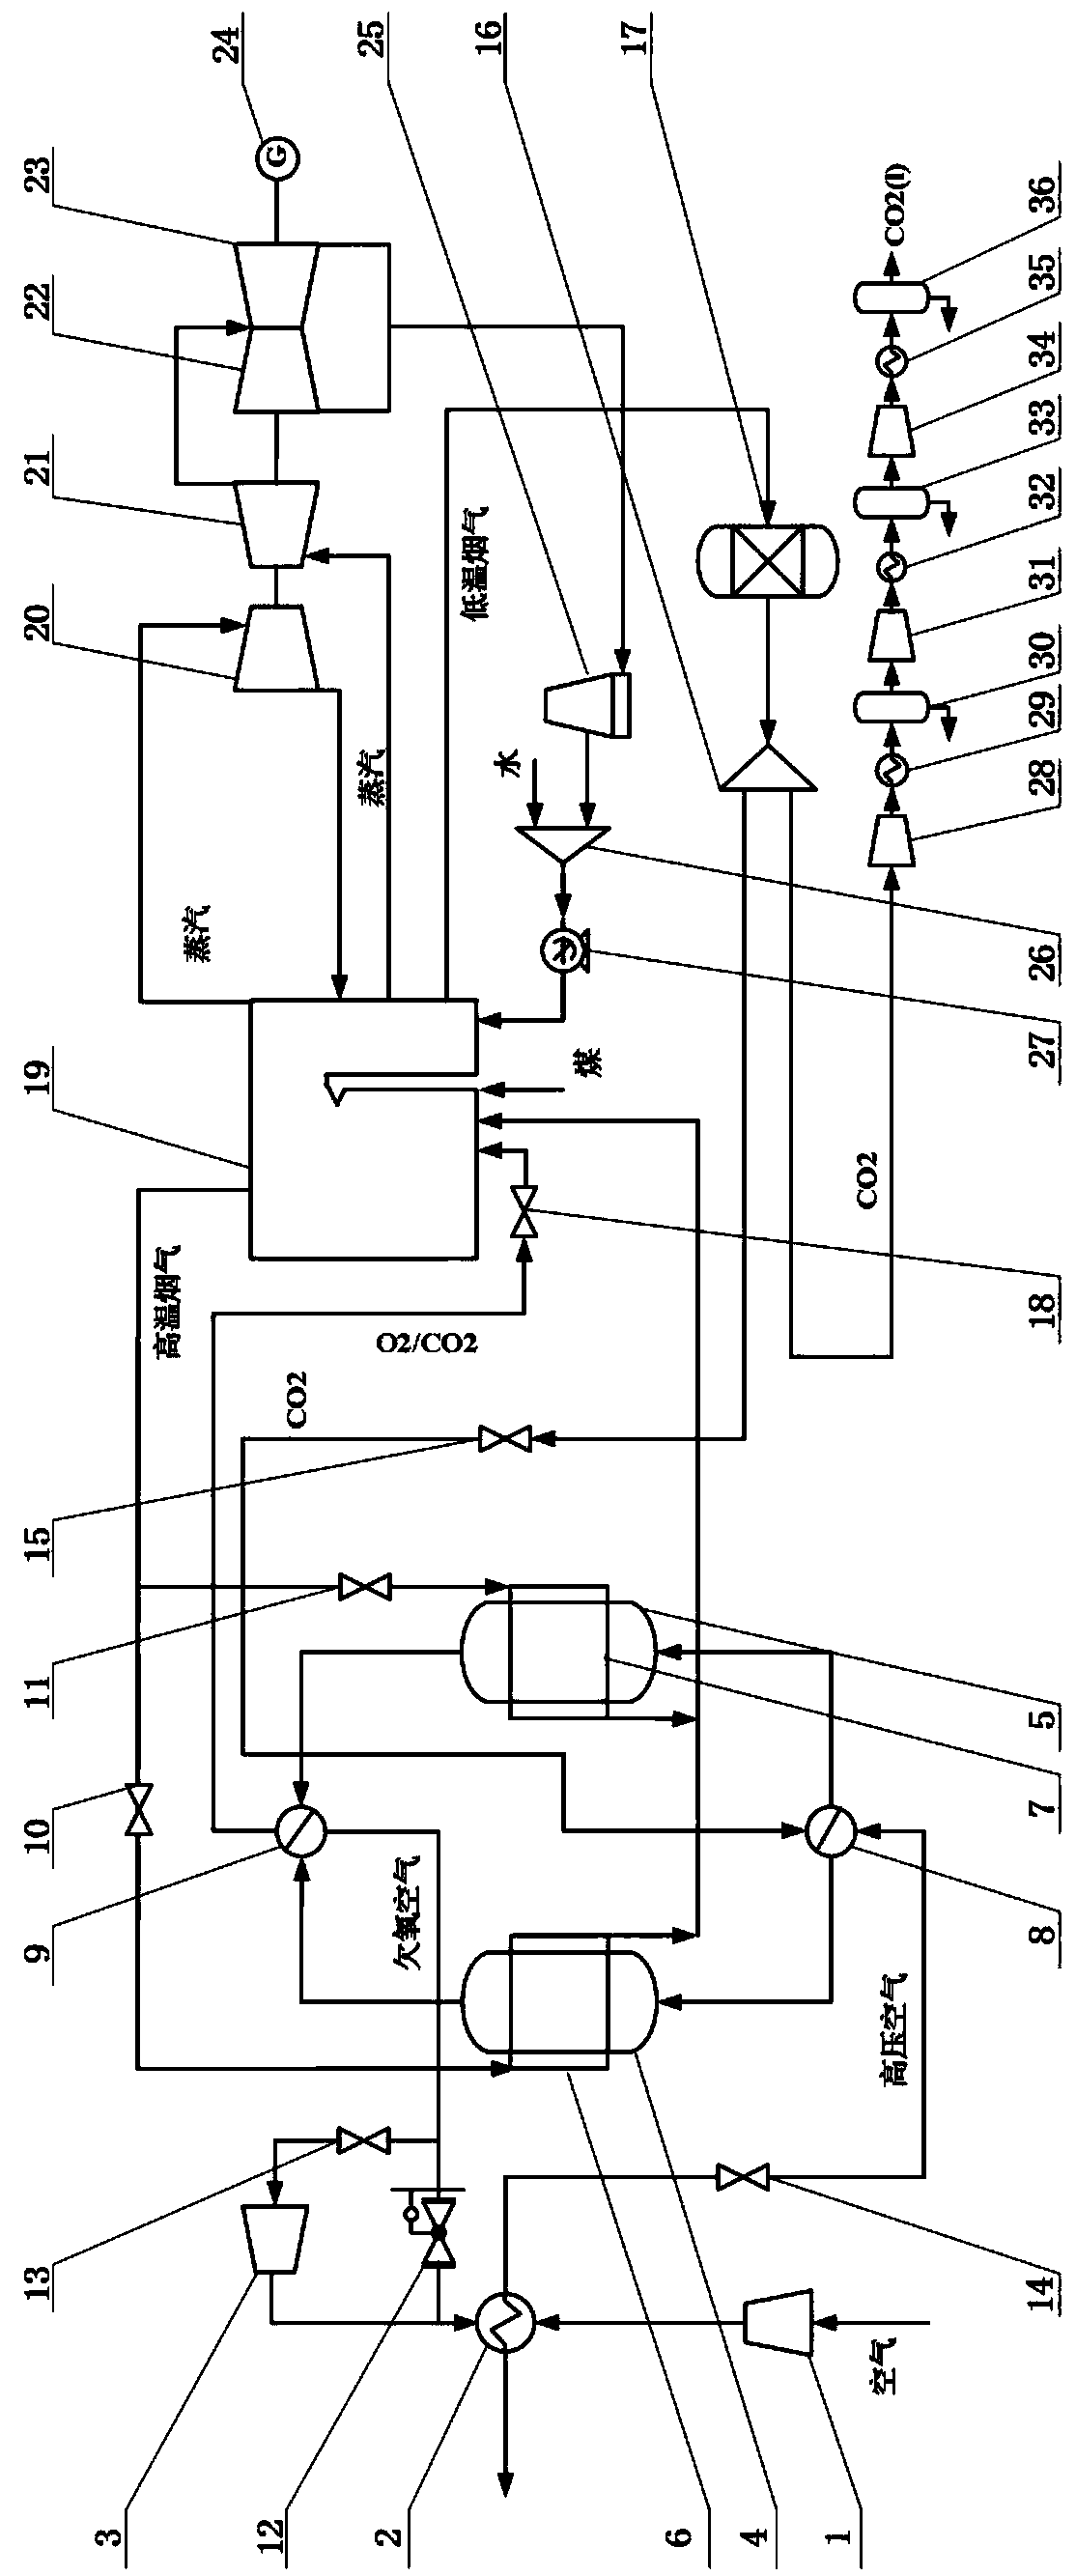 Oxygen-enriched combustion system and method based on novel chemical chain oxygen production